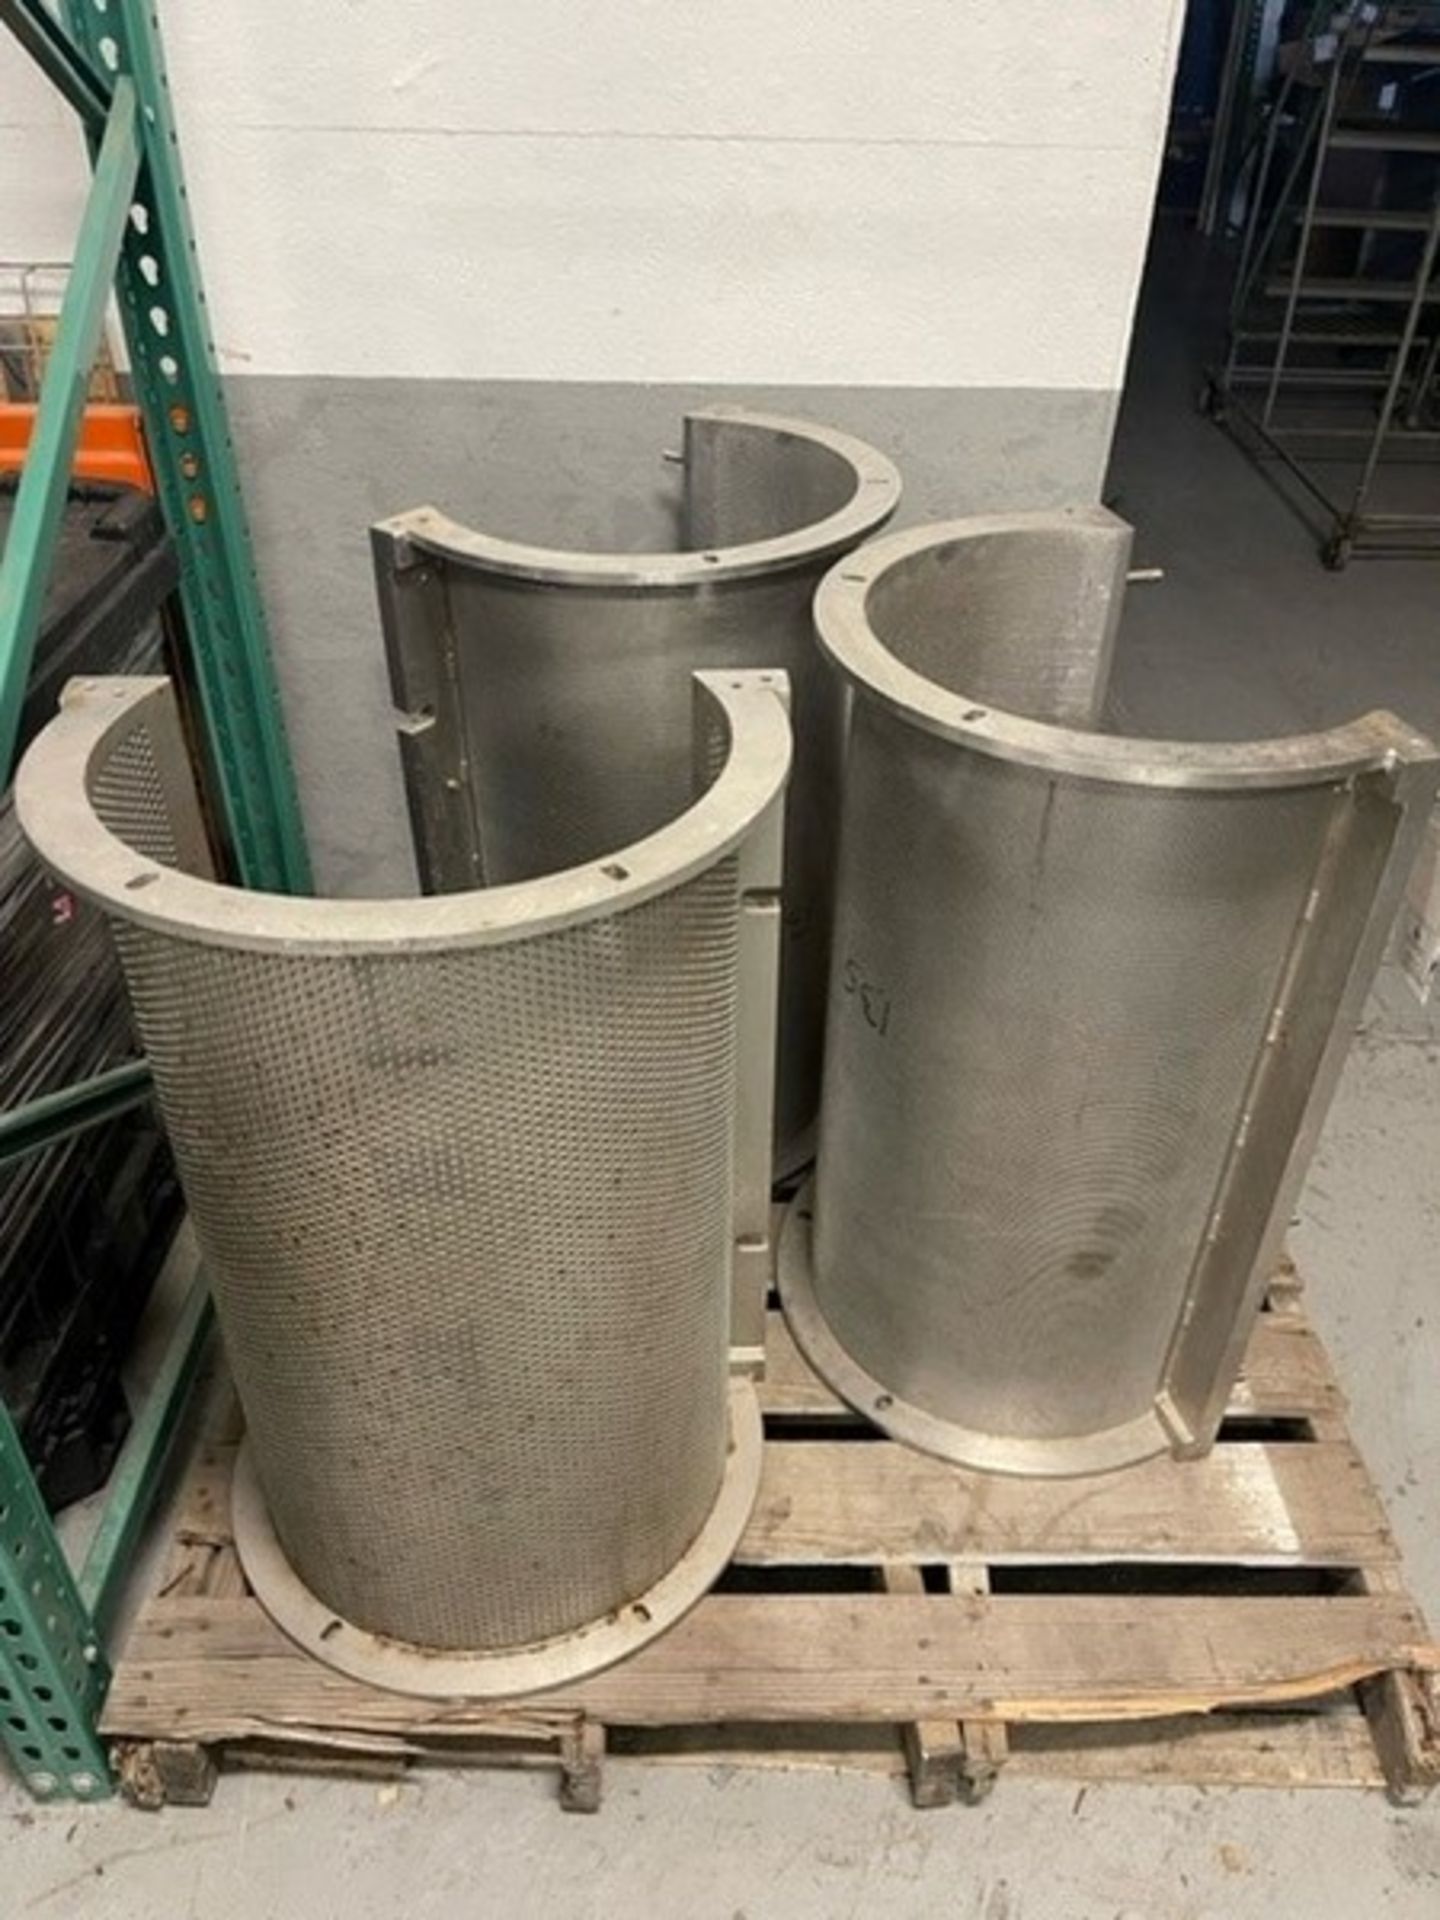 Lot of (3) Ahlstrom S/S Screens, Part No.: 2.0T6/2 26.10C4493-8748-1-2 & 6751-1-5, Dims.: Aprox. 32"